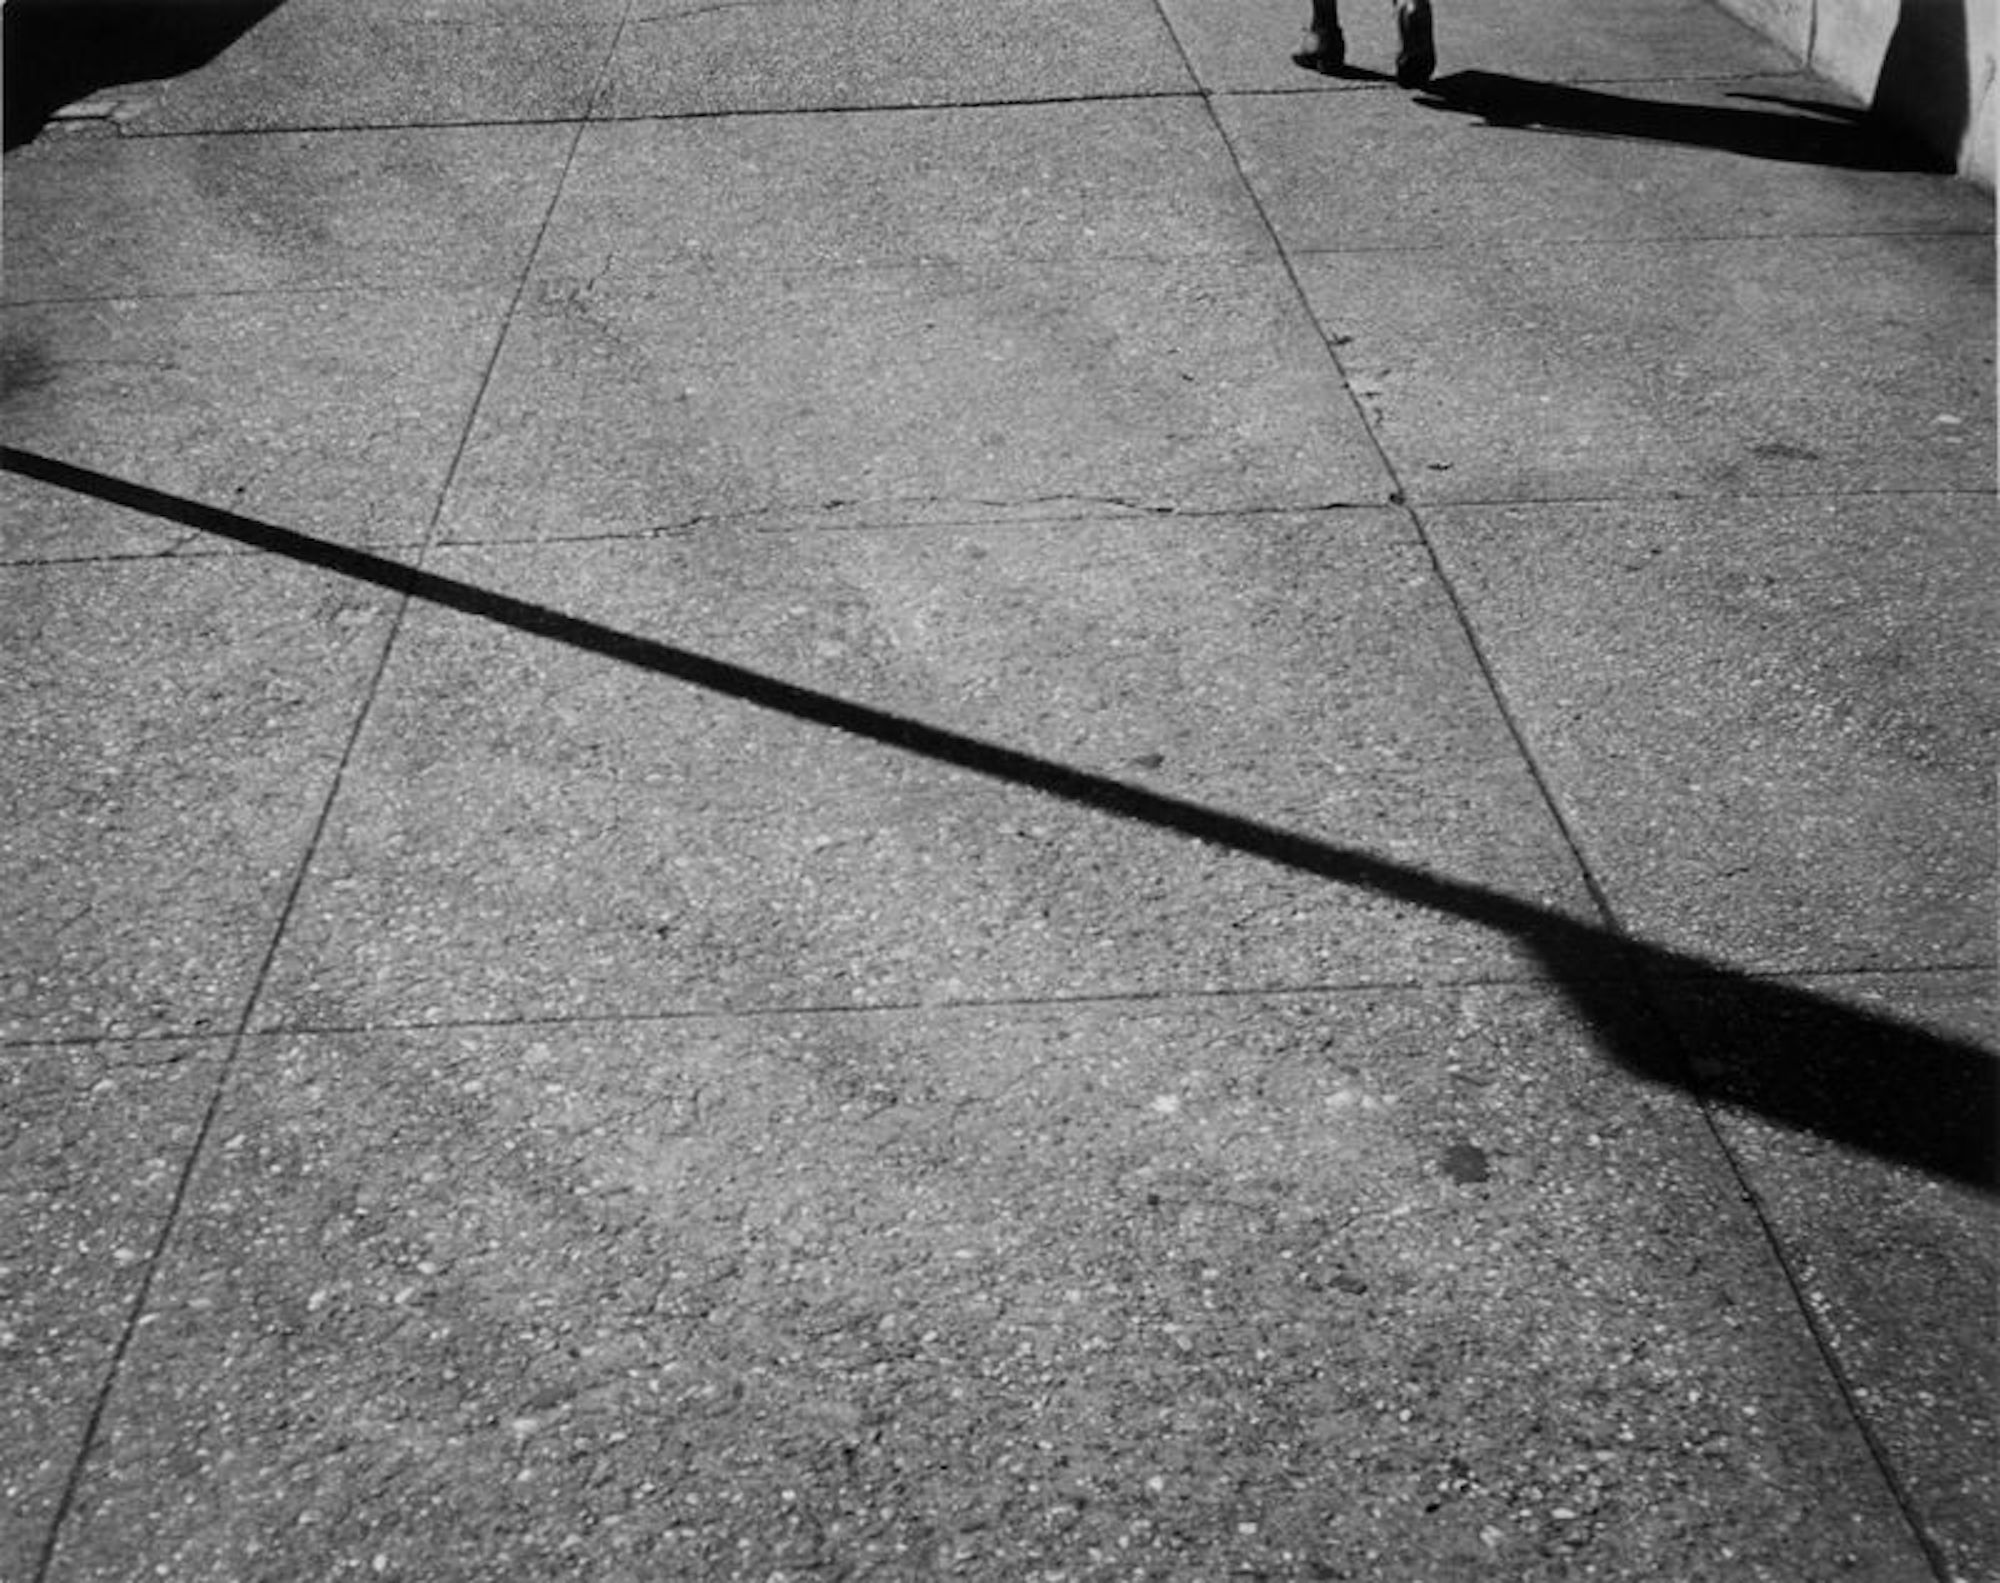 Andy Warhol, born Pittsburgh, Pennsylvania 1928, died New York City, New York 1987, <em>Shadow on sidewalk</em>, 1983, New York, gelatin silver photograph, 20.2 x 25.5cm (image &amp; sheet); V.B. F. Young Bequest Fund and d’Auvergne Boxall Bequest Fund 2018, Art Gallery of South Australia, Adelaide, © Andy Warhol Foundation for the Visual Arts, Inc. ARS/Copyright Agency.